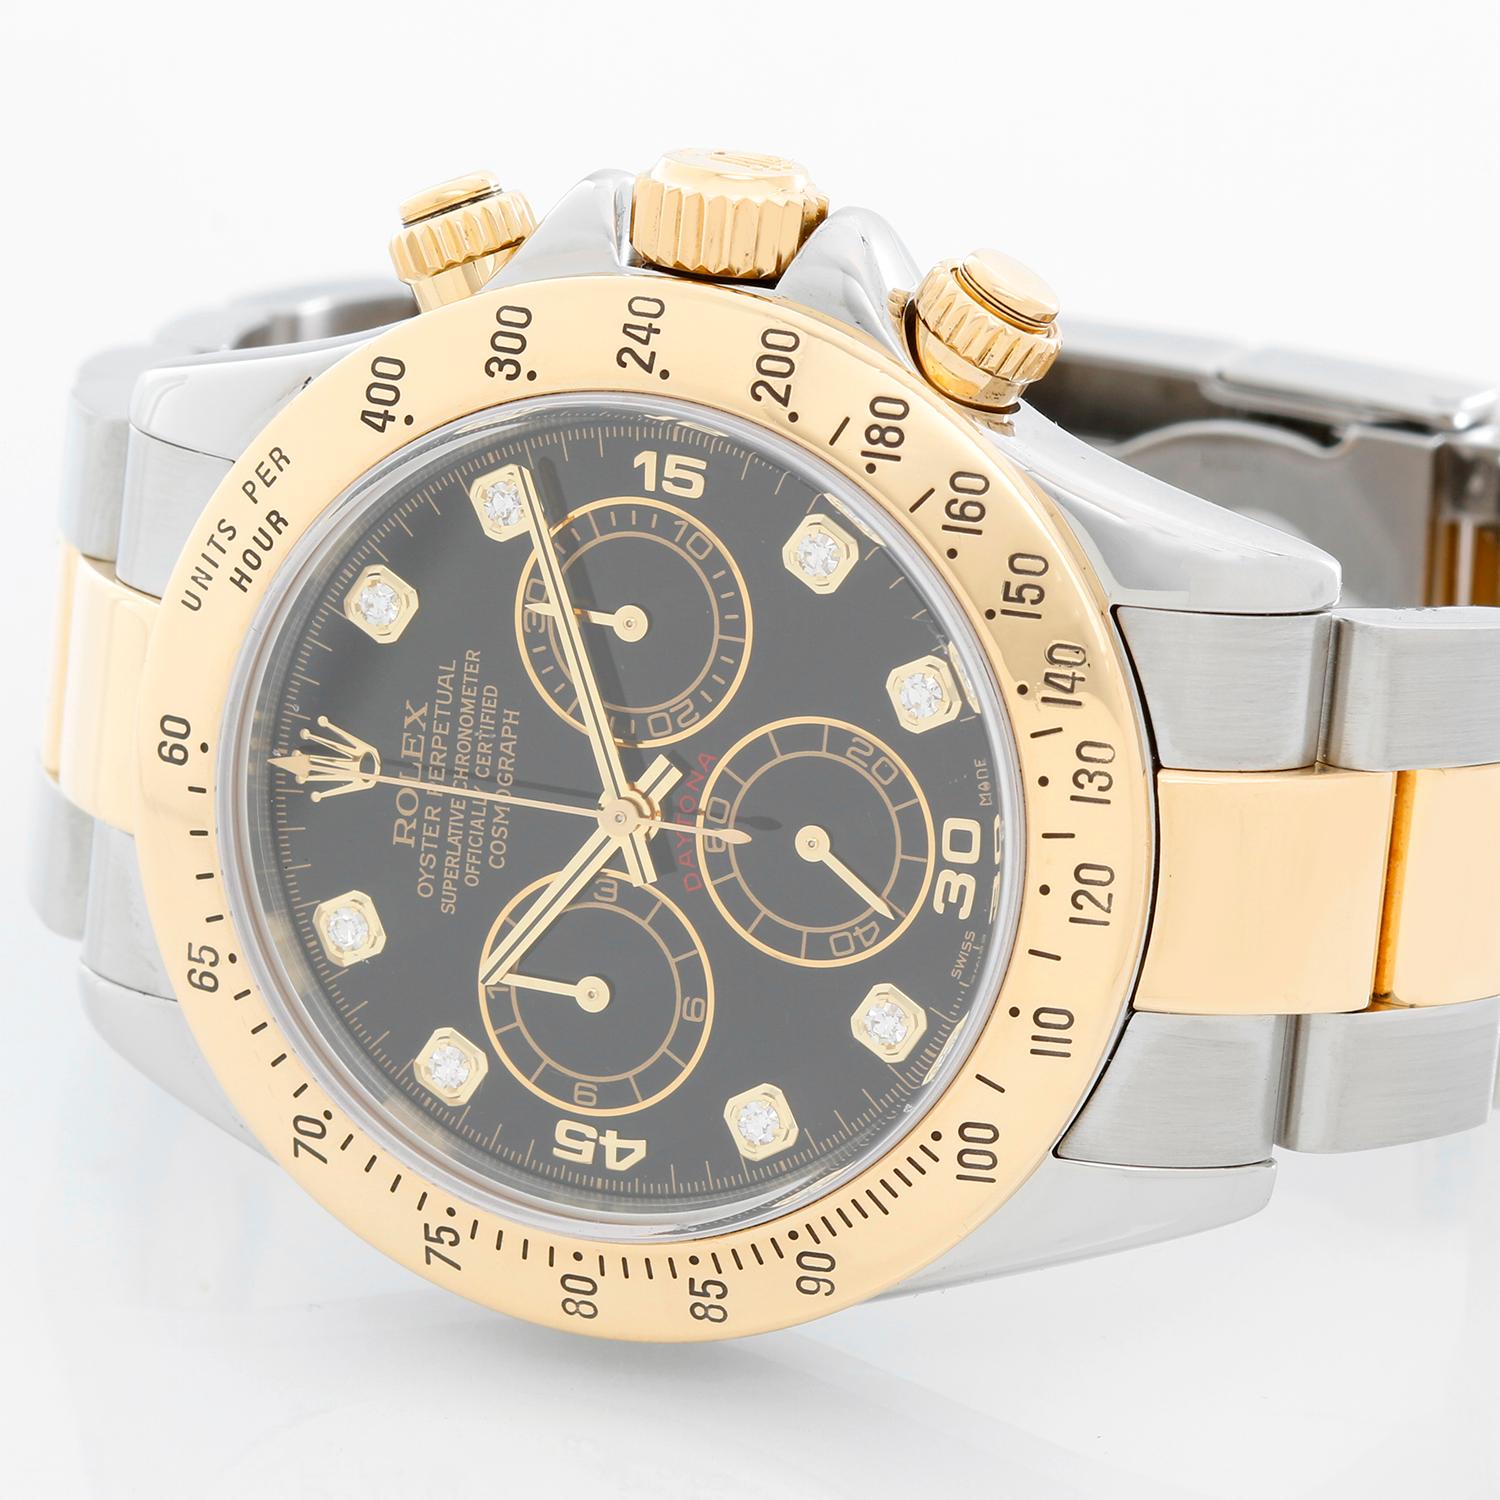 Rolex Cosmograph Daytona Men's Watch 116523 - Automatic winding, chronograph, 44 jewels, sapphire crystal. Stainless steel case with 18k yellow gold bezel ( 40 mm ) . Factory black diamond dial. Stainless steel and 18k yellow gold Oyster bracelet